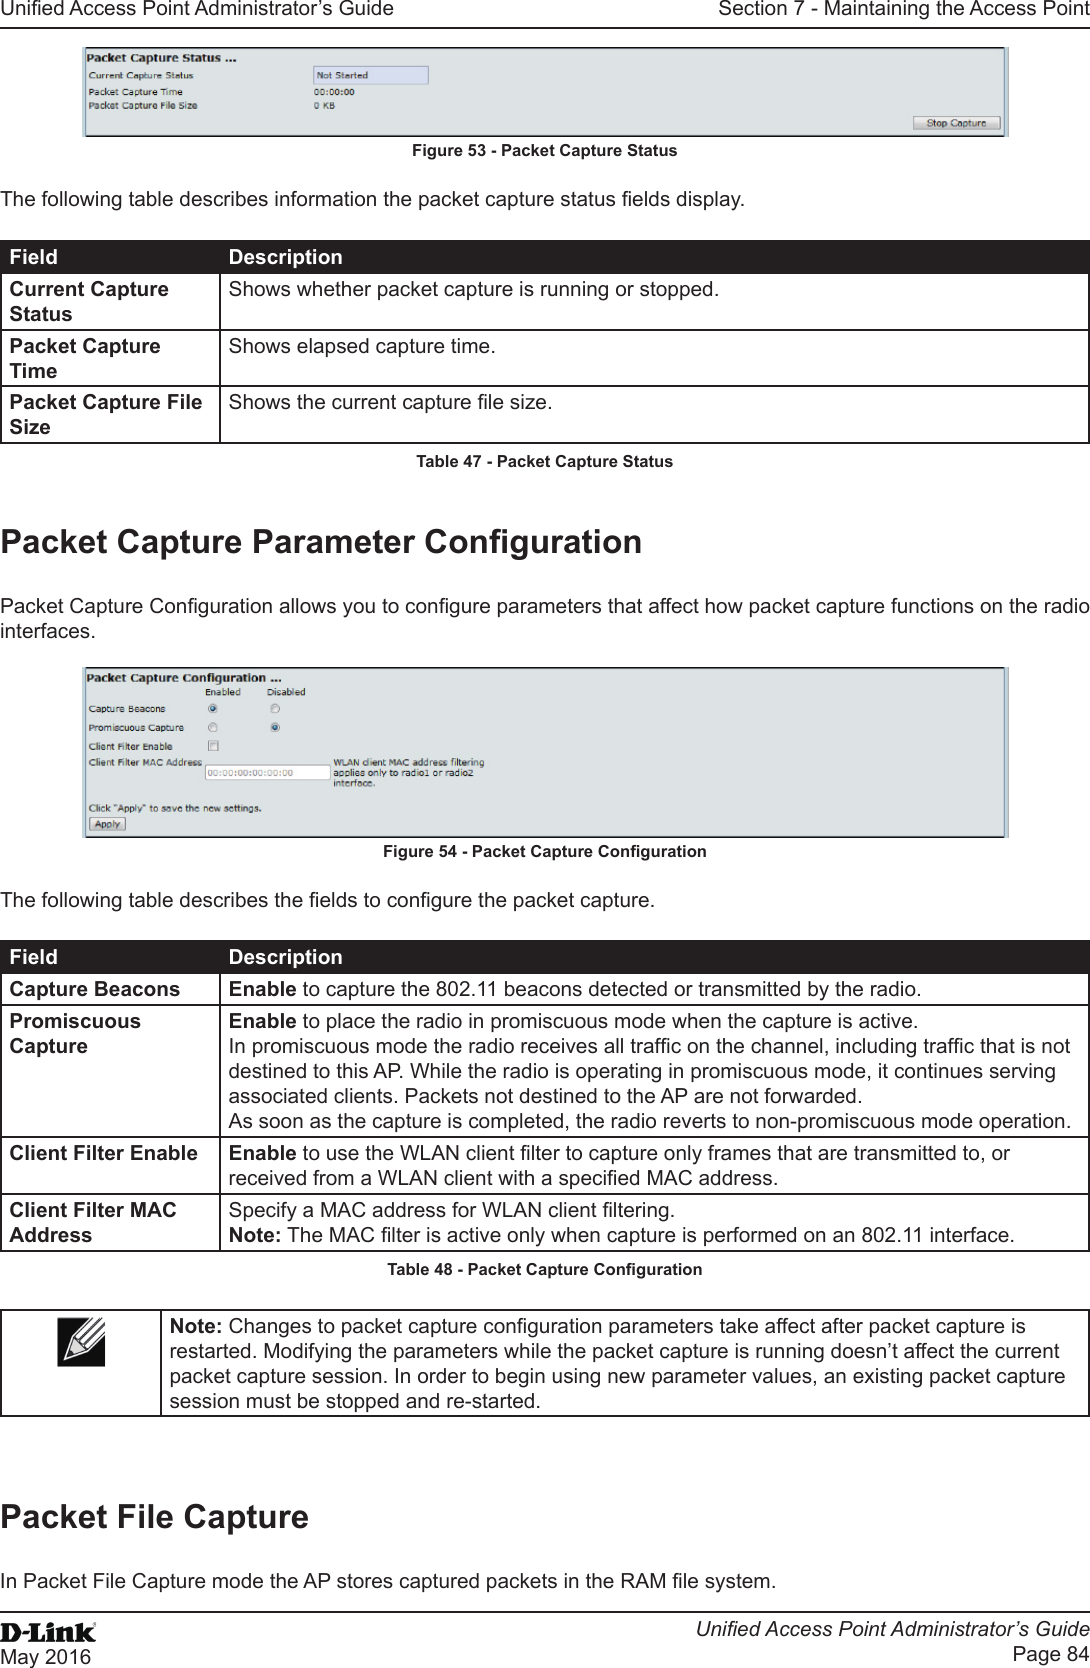 Unied Access Point Administrator’s GuideUnied Access Point Administrator’s GuidePage 84May 2016Section 7 - Maintaining the Access PointFigure 53 - Packet Capture StatusThe following table describes information the packet capture status elds display.Field DescriptionCurrent Capture StatusShows whether packet capture is running or stopped.Packet Capture TimeShows elapsed capture time.Packet Capture File SizeShows the current capture le size.Table 47 - Packet Capture StatusPacket Capture Parameter CongurationPacket Capture Conguration allows you to congure parameters that affect how packet capture functions on the radio interfaces.Figure 54 - Packet Capture CongurationThe following table describes the elds to congure the packet capture.Field DescriptionCapture Beacons Enable to capture the 802.11 beacons detected or transmitted by the radio.Promiscuous CaptureEnable to place the radio in promiscuous mode when the capture is active. In promiscuous mode the radio receives all trafc on the channel, including trafc that is not destined to this AP. While the radio is operating in promiscuous mode, it continues serving associated clients. Packets not destined to the AP are not forwarded. As soon as the capture is completed, the radio reverts to non-promiscuous mode operation.Client Filter Enable Enable to use the WLAN client lter to capture only frames that are transmitted to, or received from a WLAN client with a specied MAC address.Client Filter MAC AddressSpecify a MAC address for WLAN client ltering.Note: The MAC lter is active only when capture is performed on an 802.11 interface.Table 48 - Packet Capture CongurationNote: Changes to packet capture conguration parameters take affect after packet capture is restarted. Modifying the parameters while the packet capture is running doesn’t affect the current packet capture session. In order to begin using new parameter values, an existing packet capture session must be stopped and re-started.Packet File CaptureIn Packet File Capture mode the AP stores captured packets in the RAM le system.